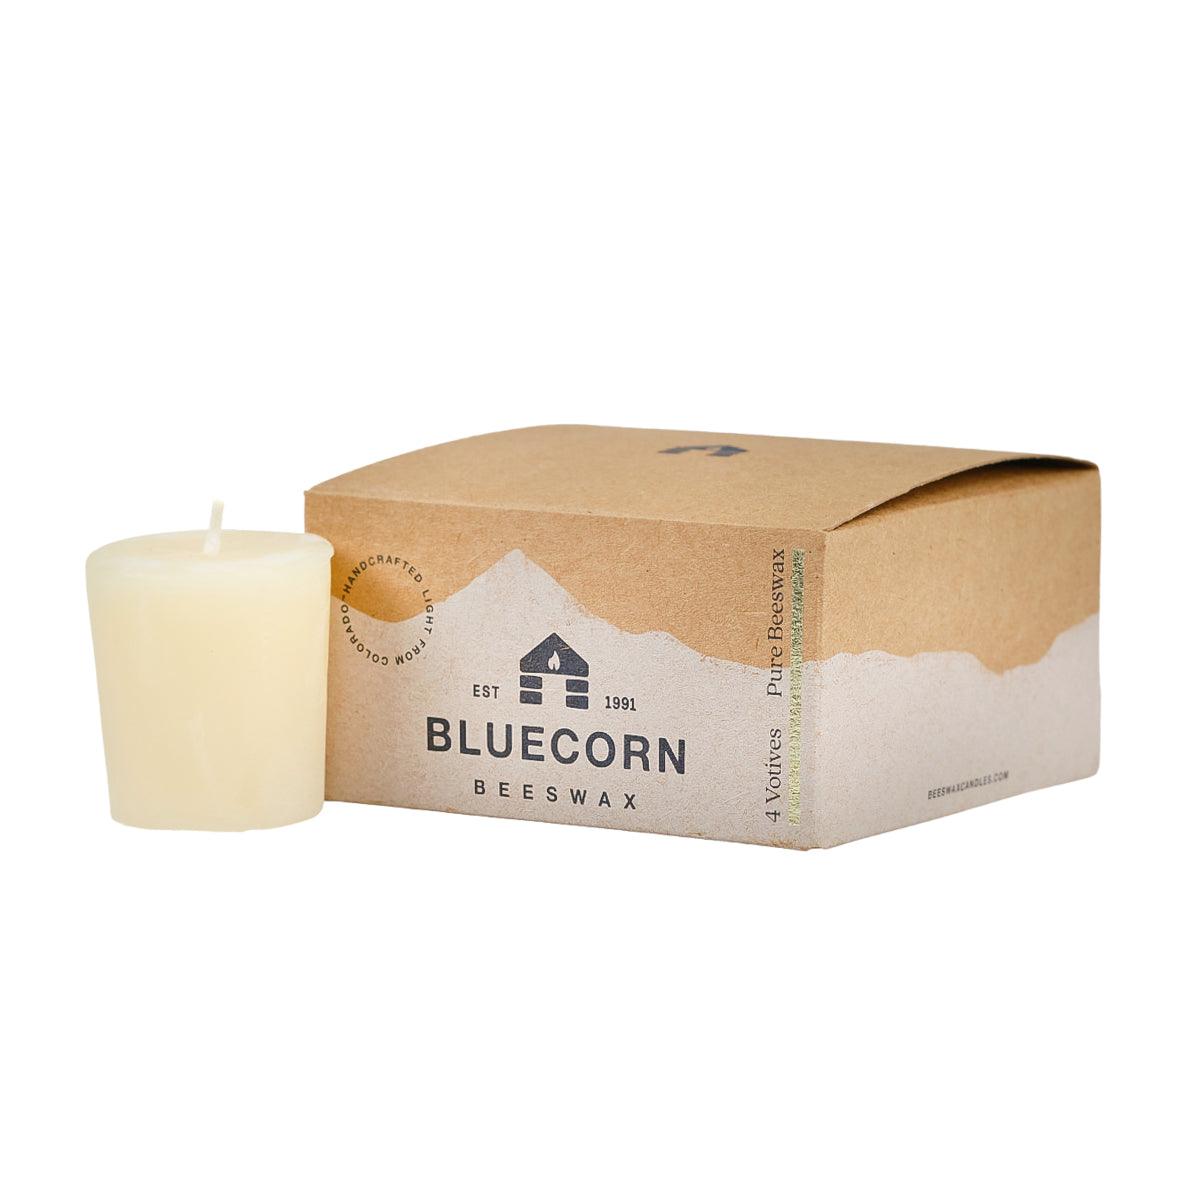 A single beeswax votive candle in the color ivory, sitting next to a closed 4-pack votive box